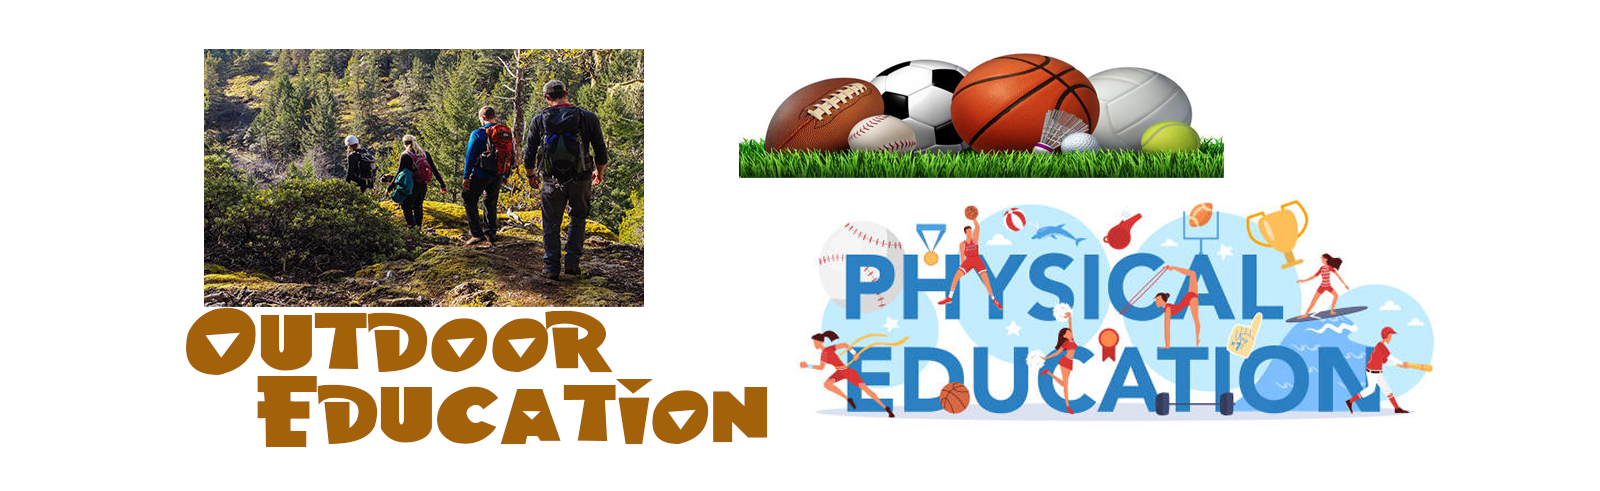 Outdoor and Physical Education Page Banner Image